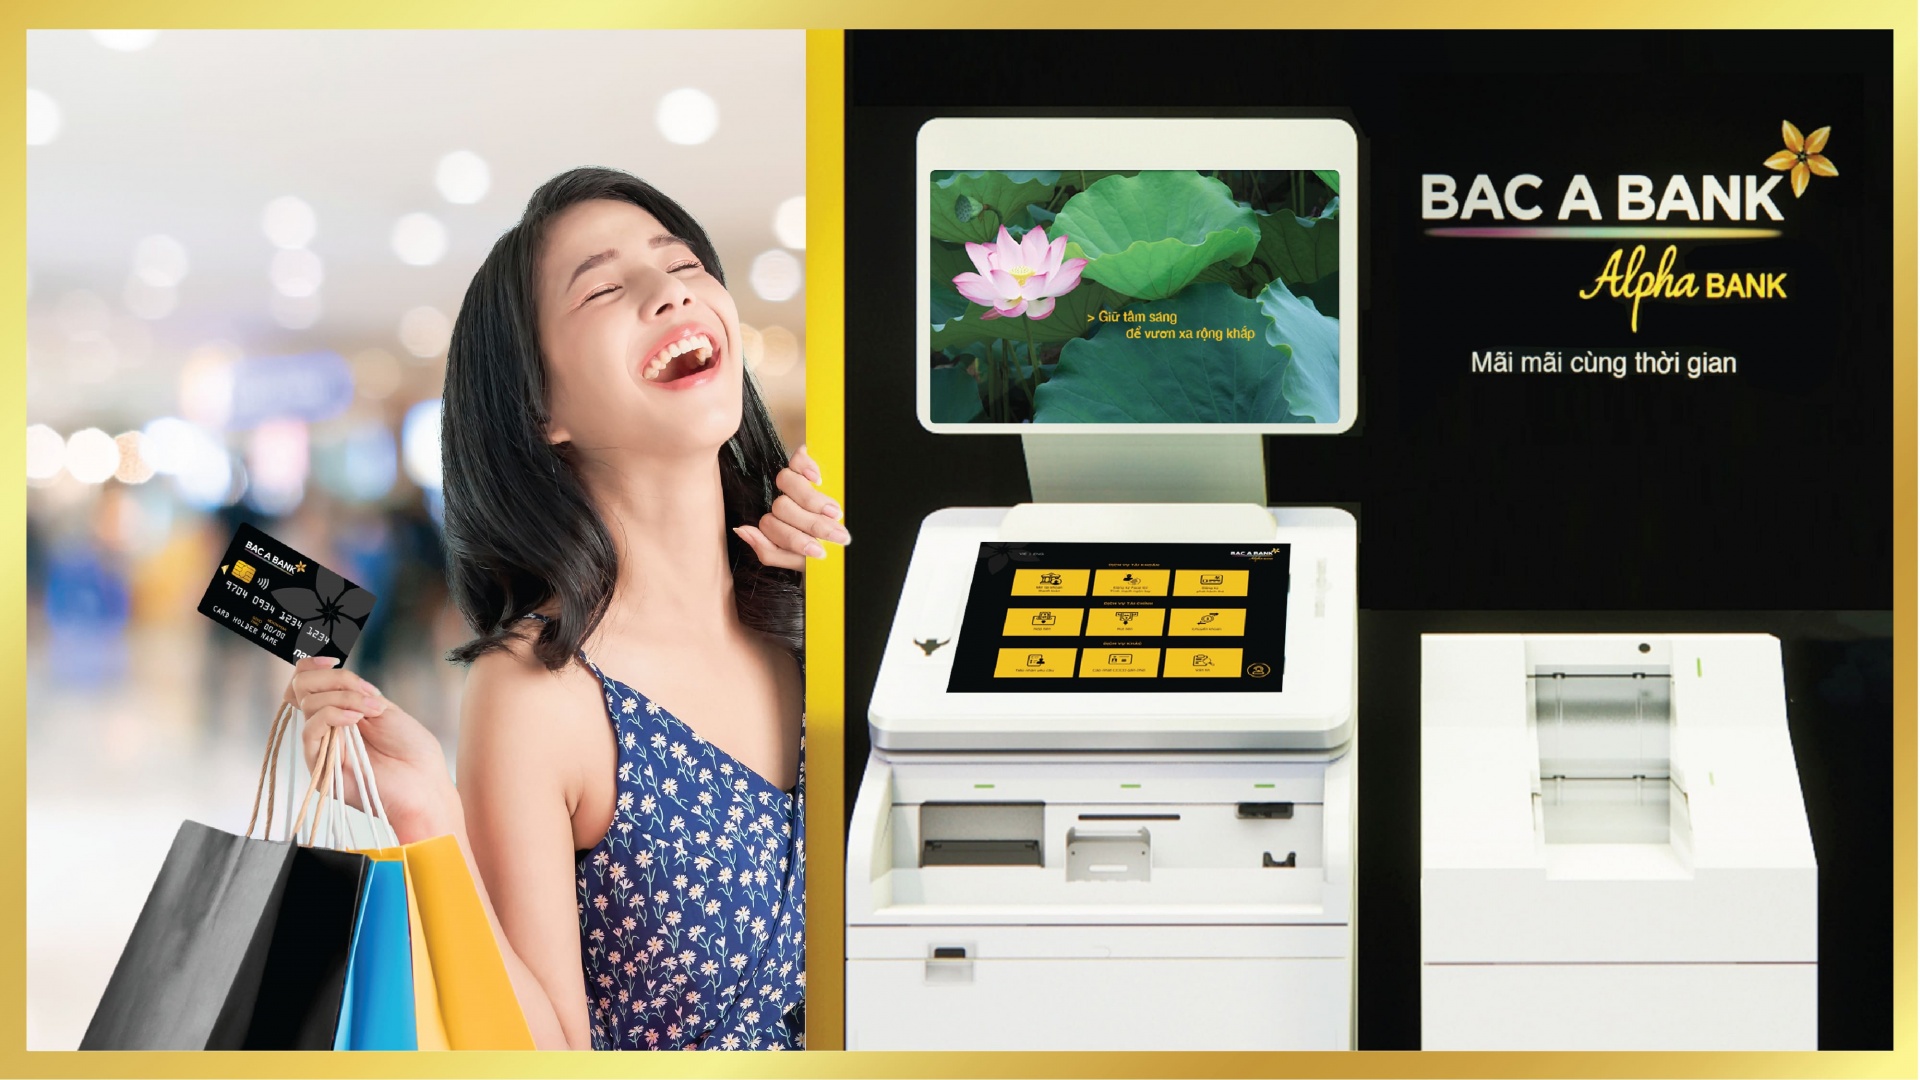 BAC A BANK launches Kiosk Banking in Hanoi